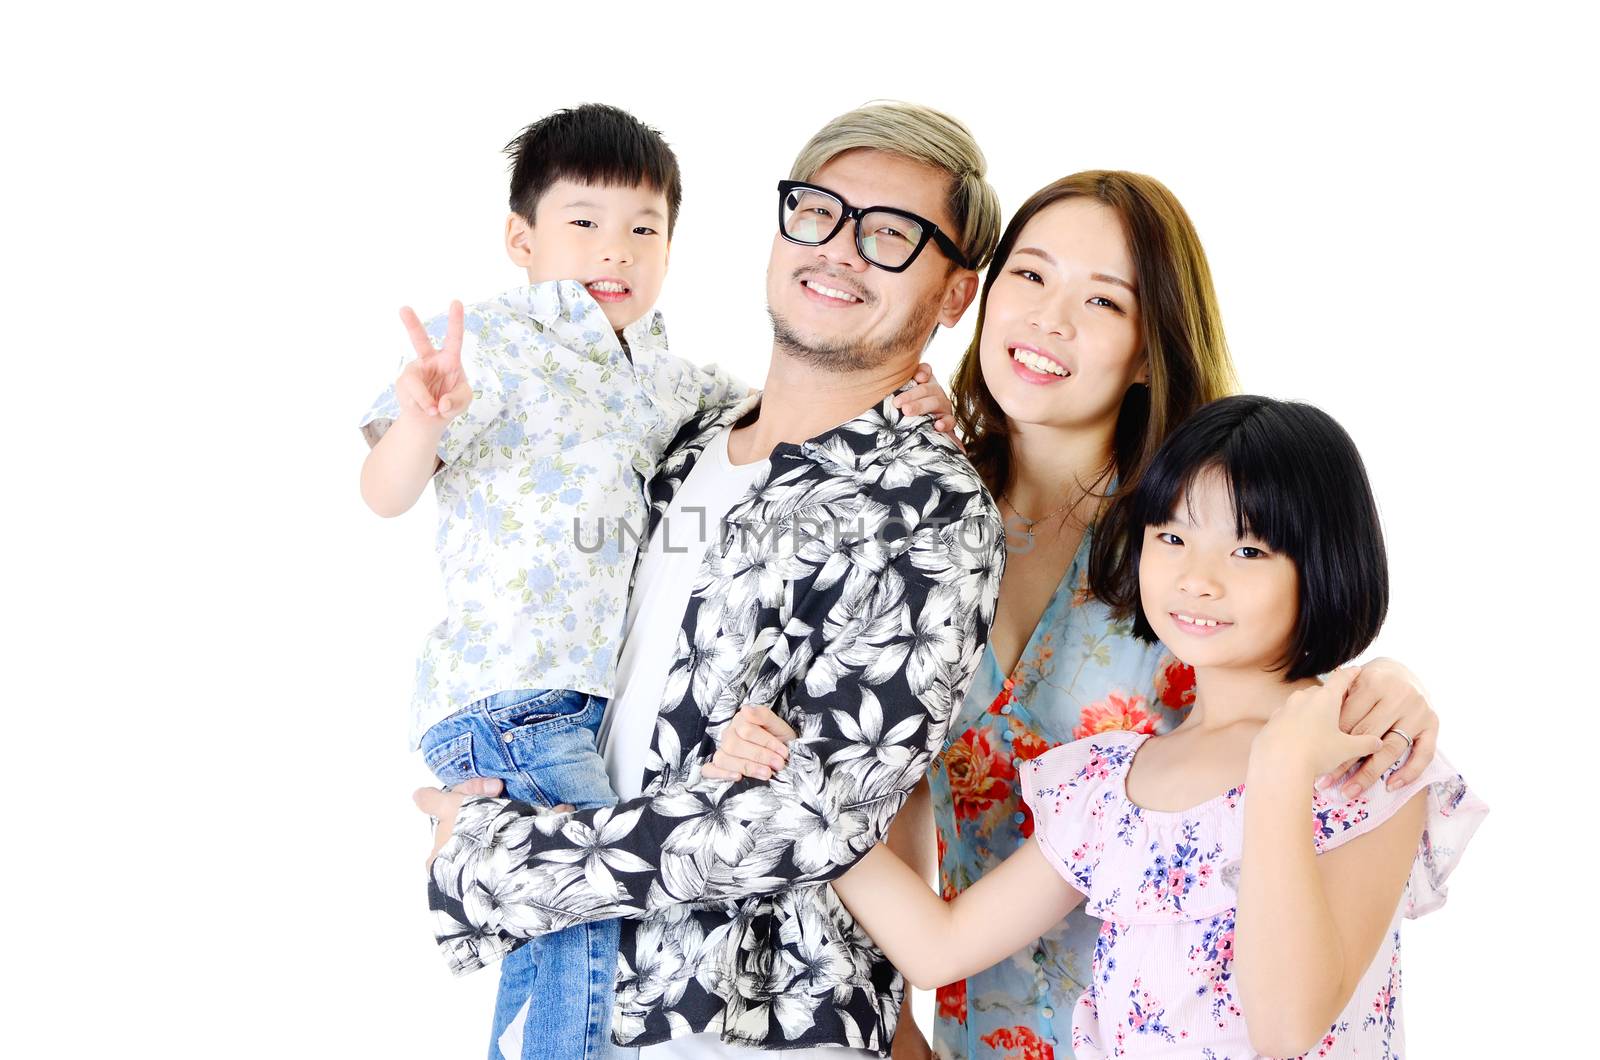 Indoor portrait of asian family at home